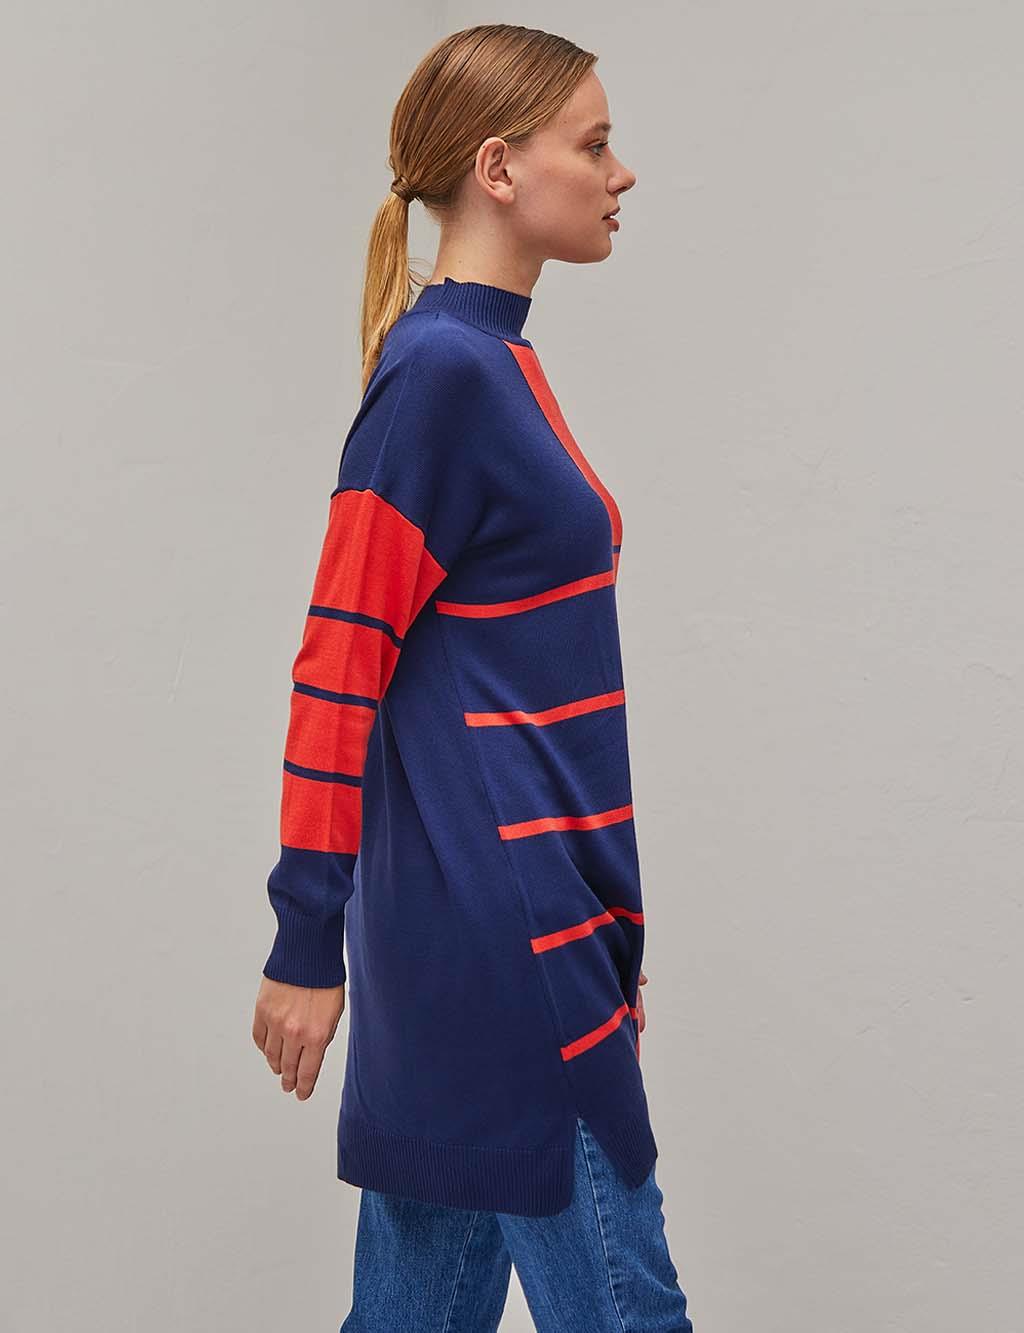 Colorful Striped Knitwear Tunic Navy